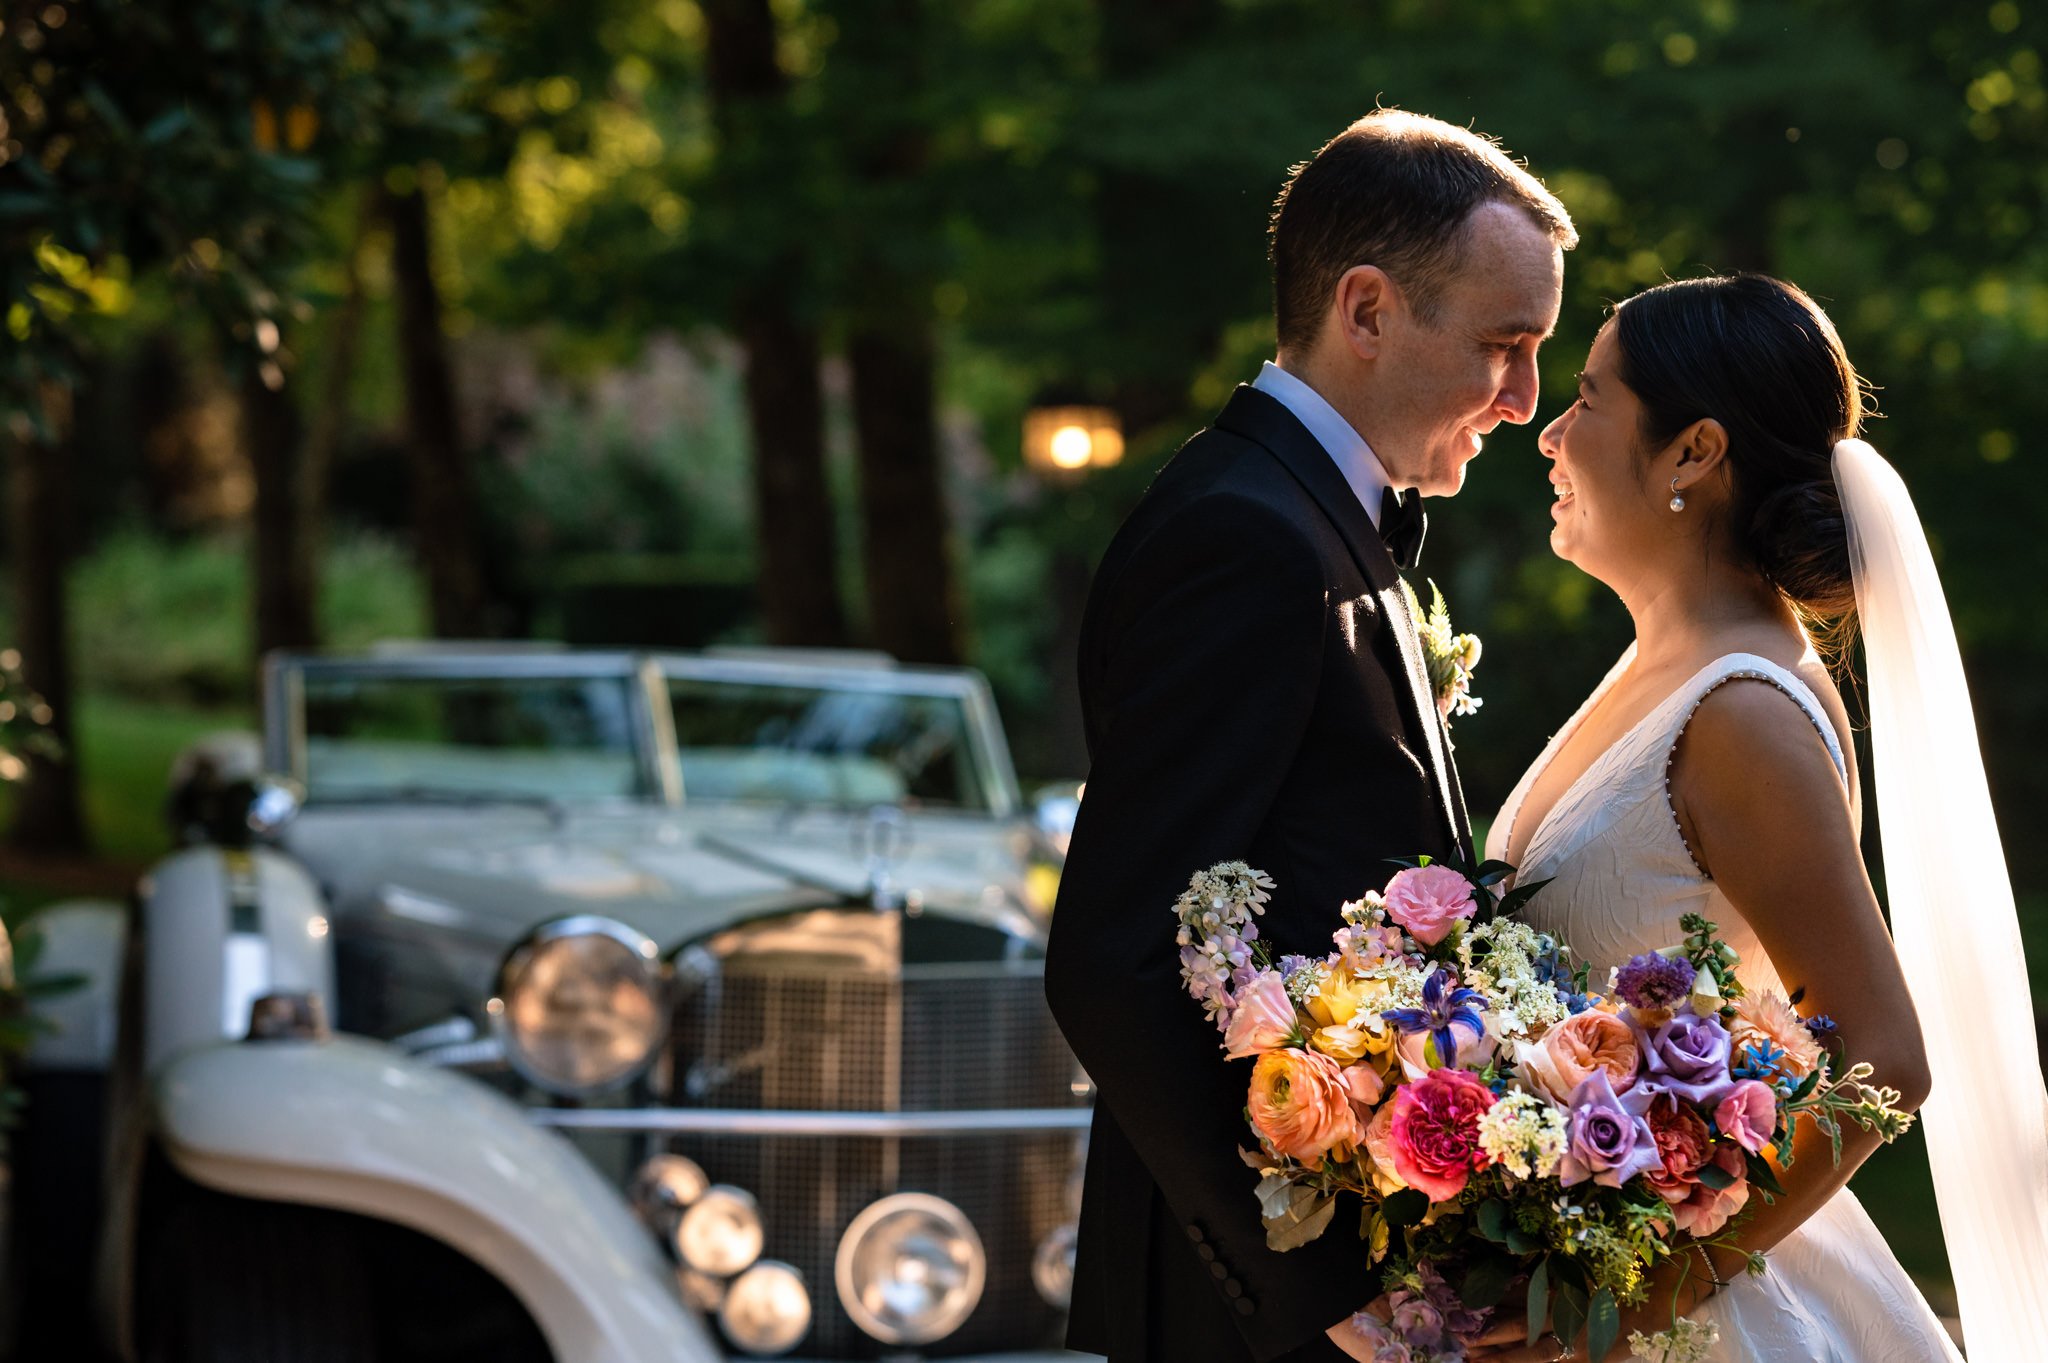 A bride and groom in front of a classic car at their farm wedding.